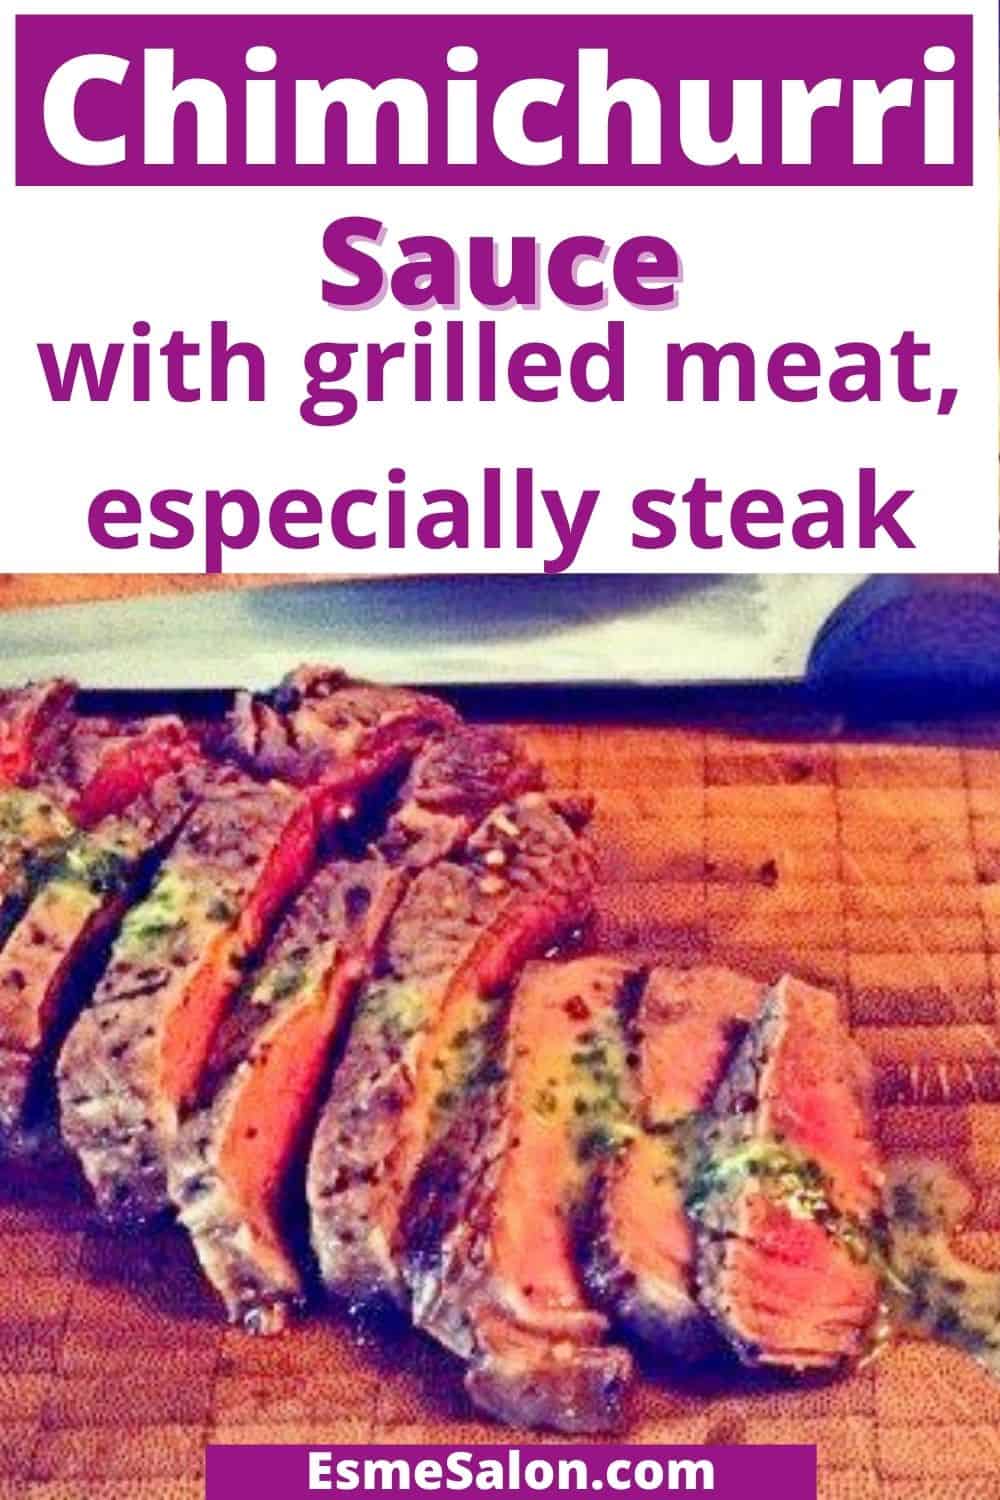 Steak slices with Chimichurri Sauce drizzled over it on a wooden board